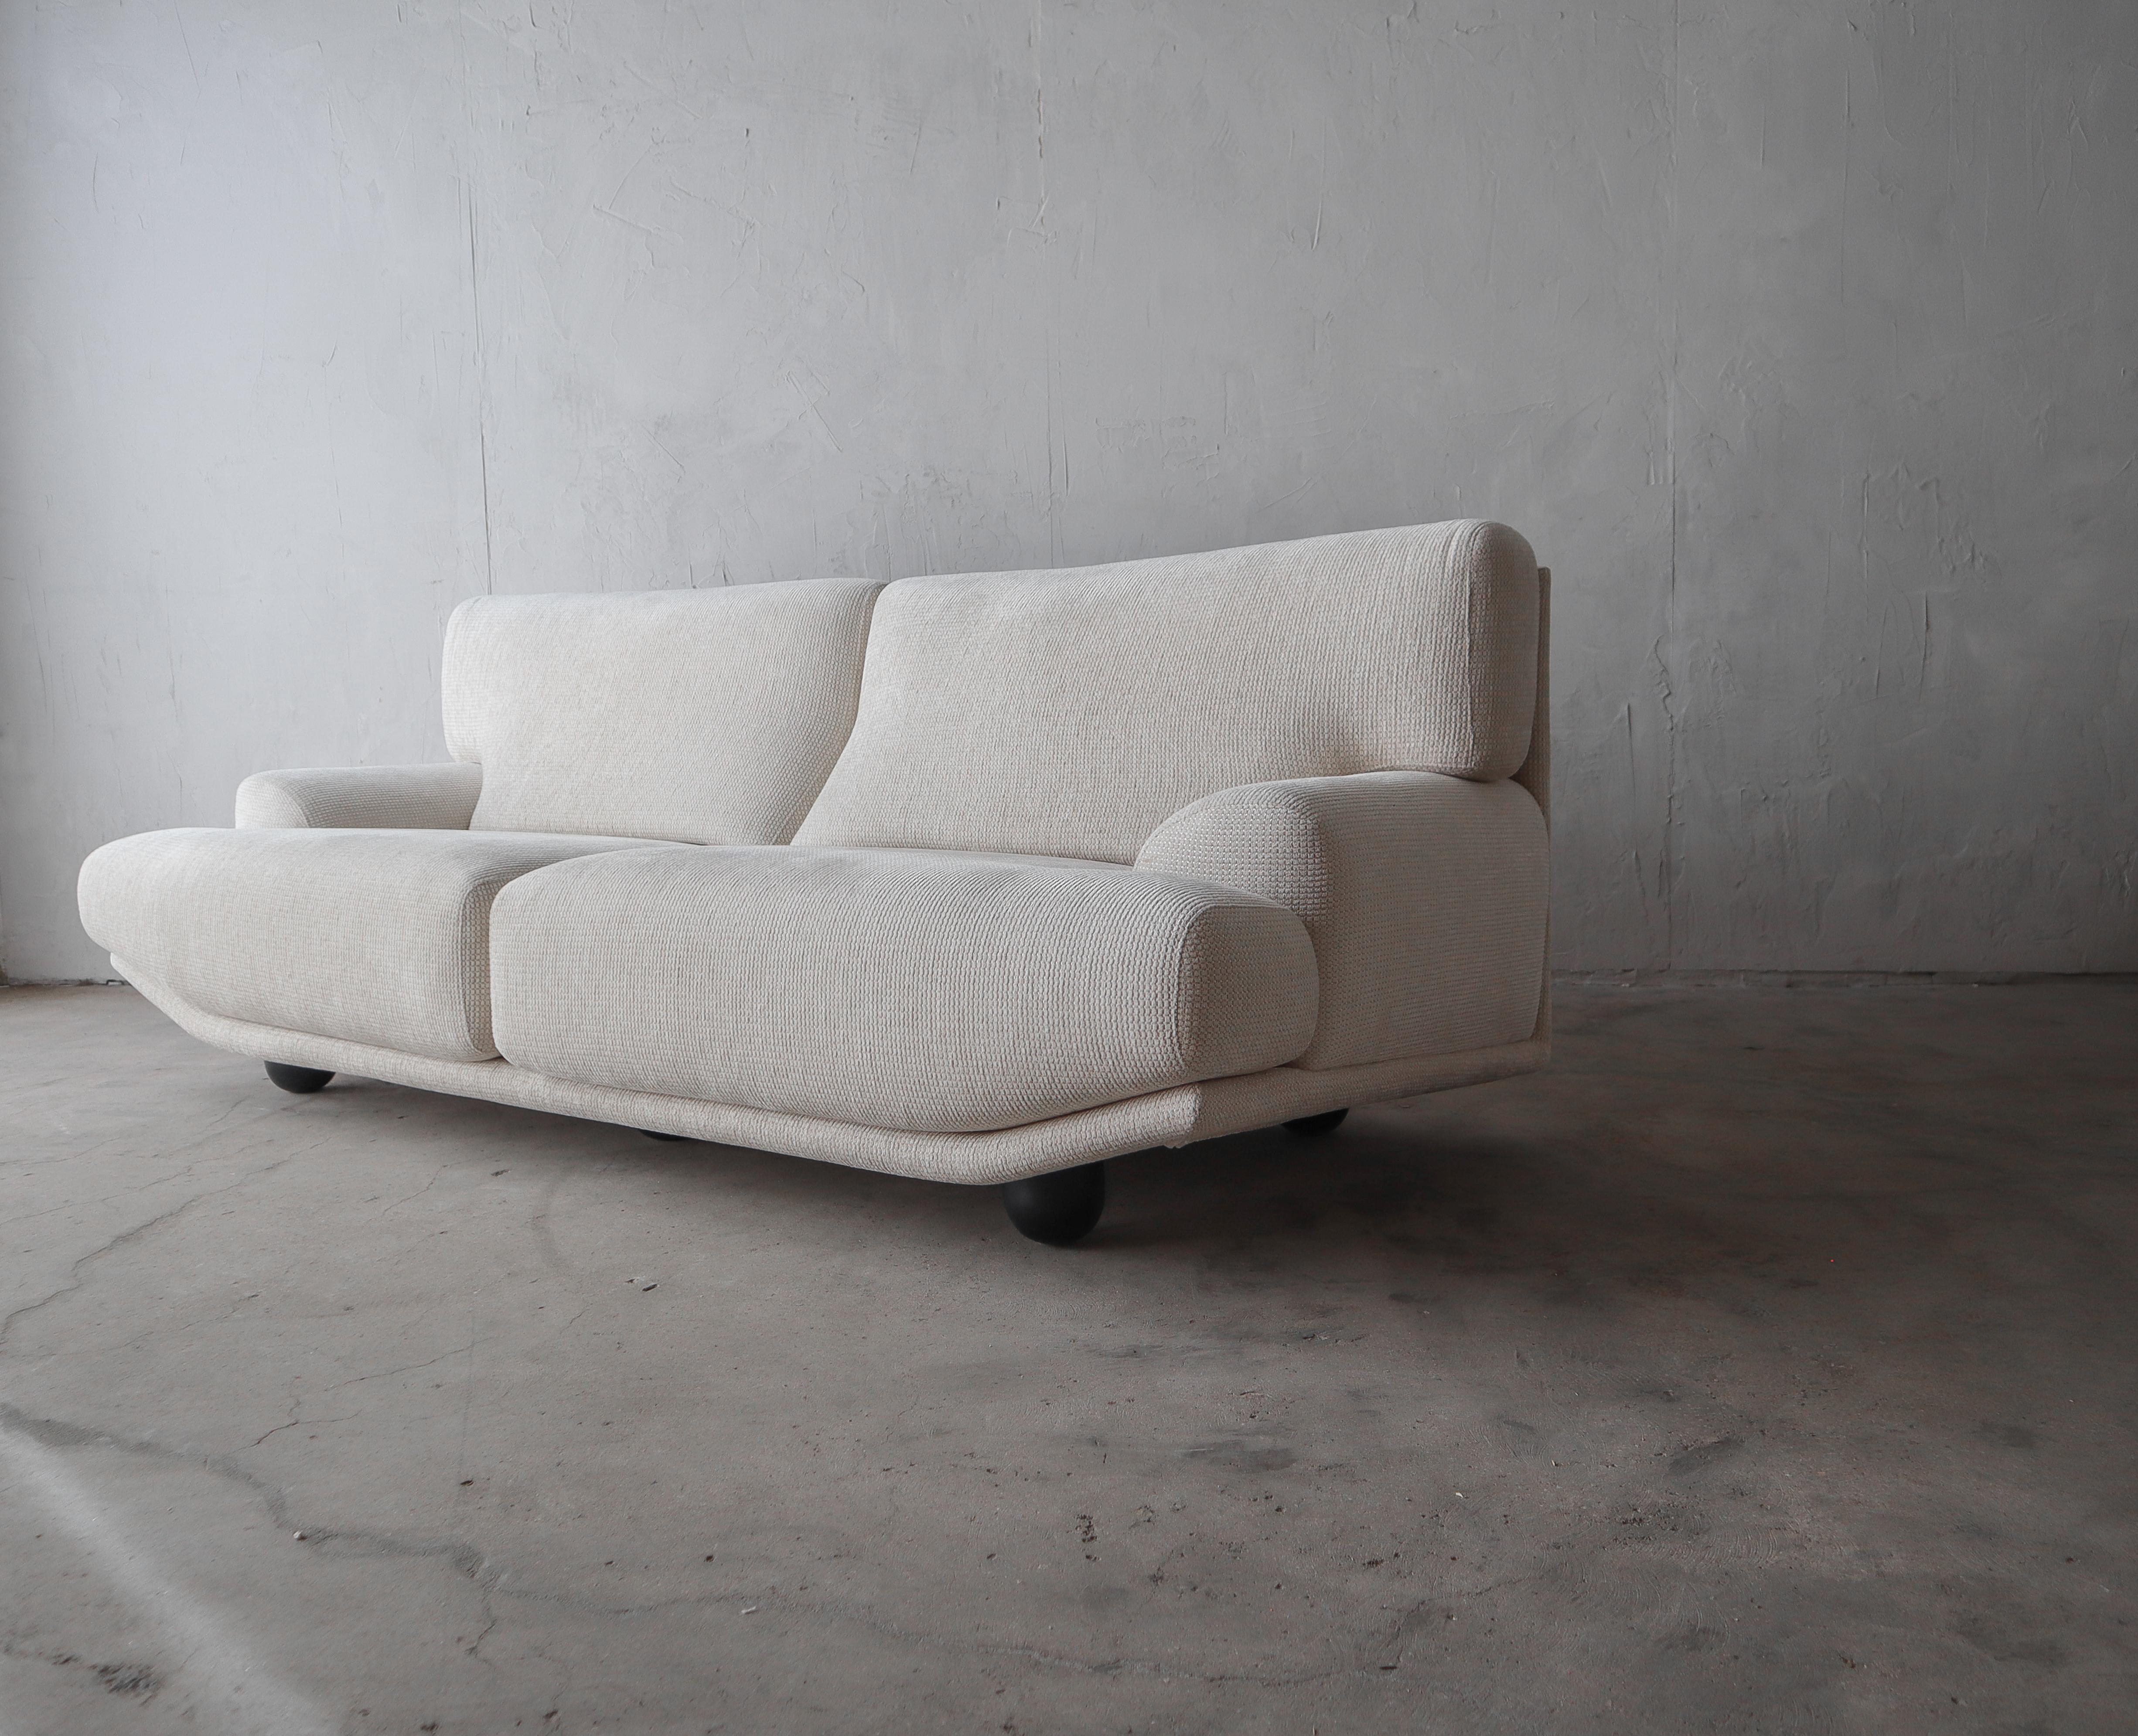 Incredible, Postmodern Italian sofa. This beauty truly has lines worth coveting. The angled frame adds visual interest. 

This sofa is in impeccable original condition, the fabric is pristine, the foam firm, it appears as if it sat untouched since